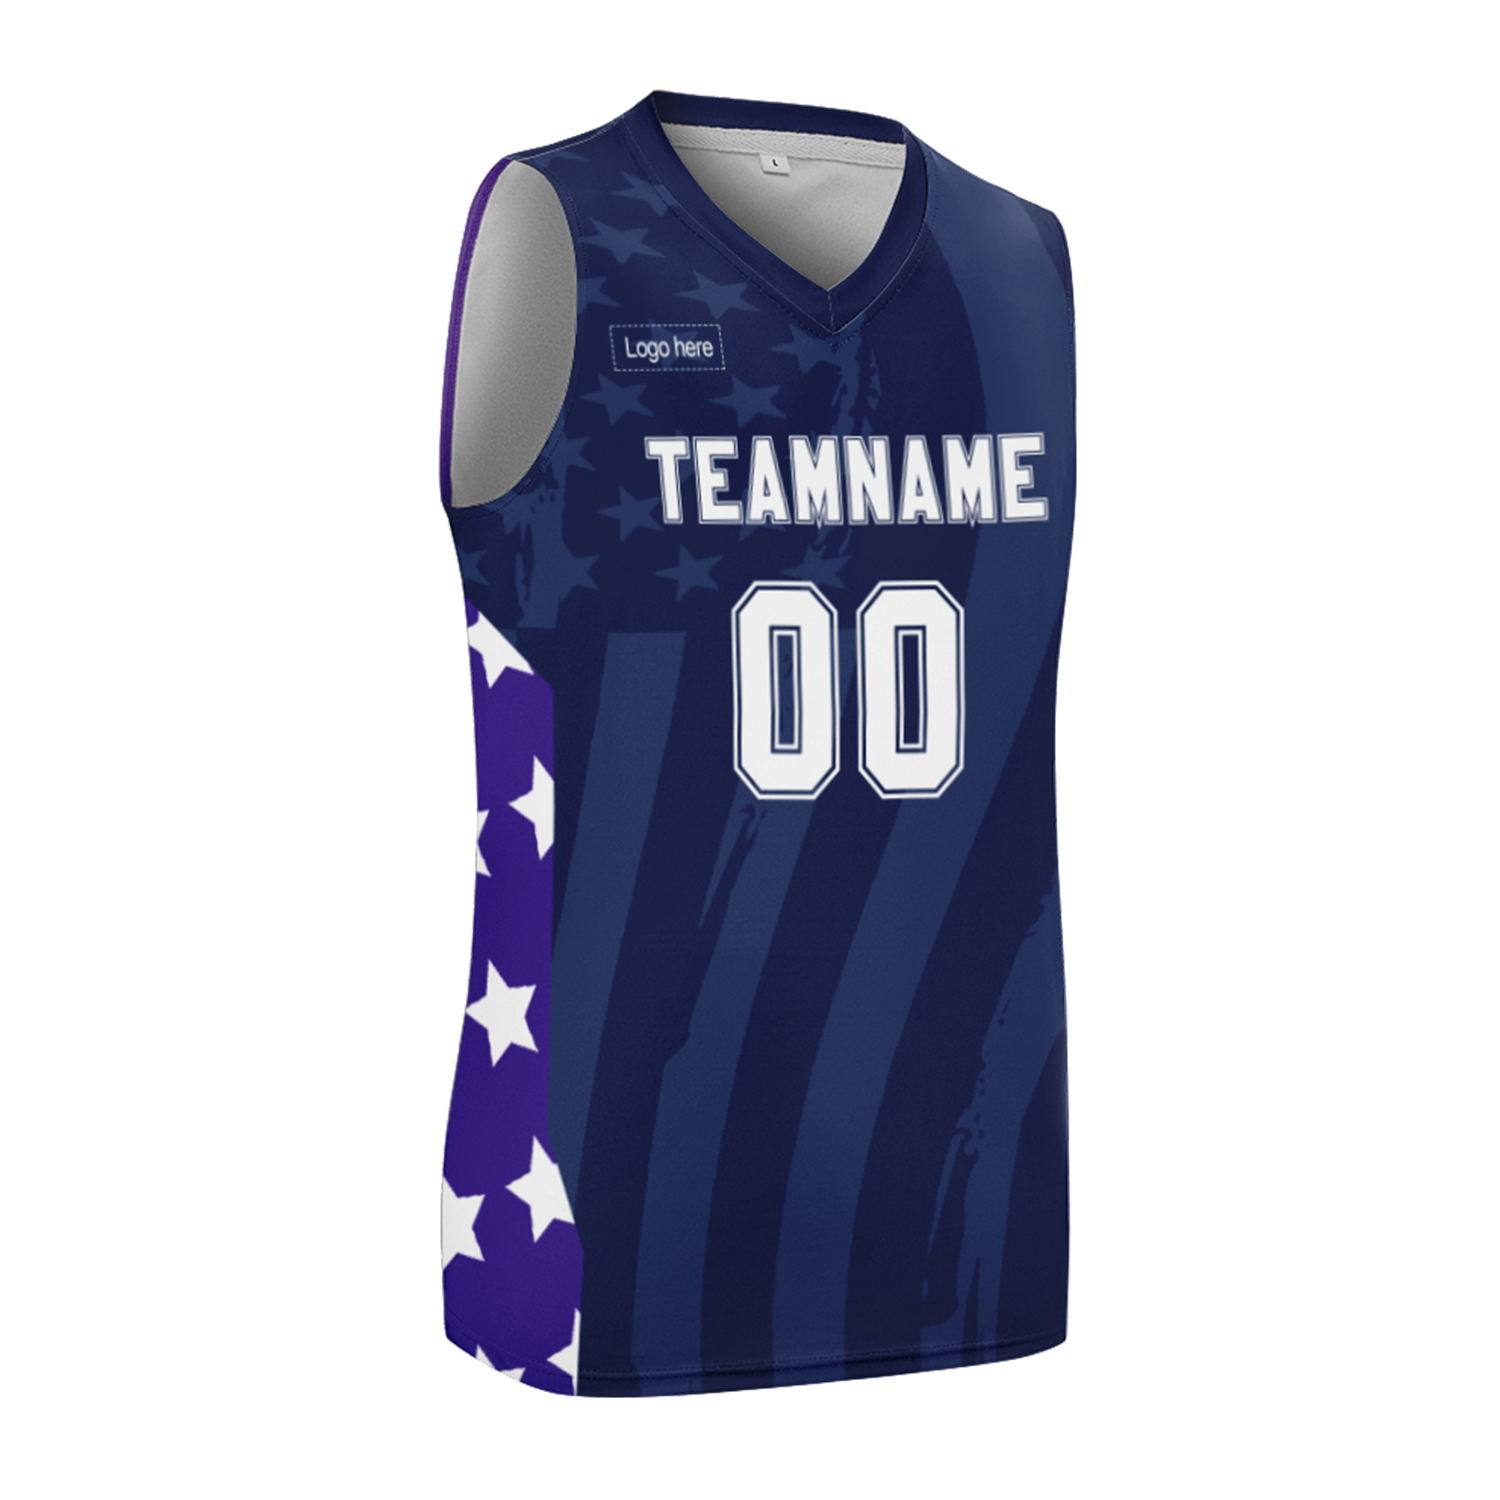 customize-basketball-sports-wear-team-training-jerseys-print-on-demand-breathable-basketball-suits-6